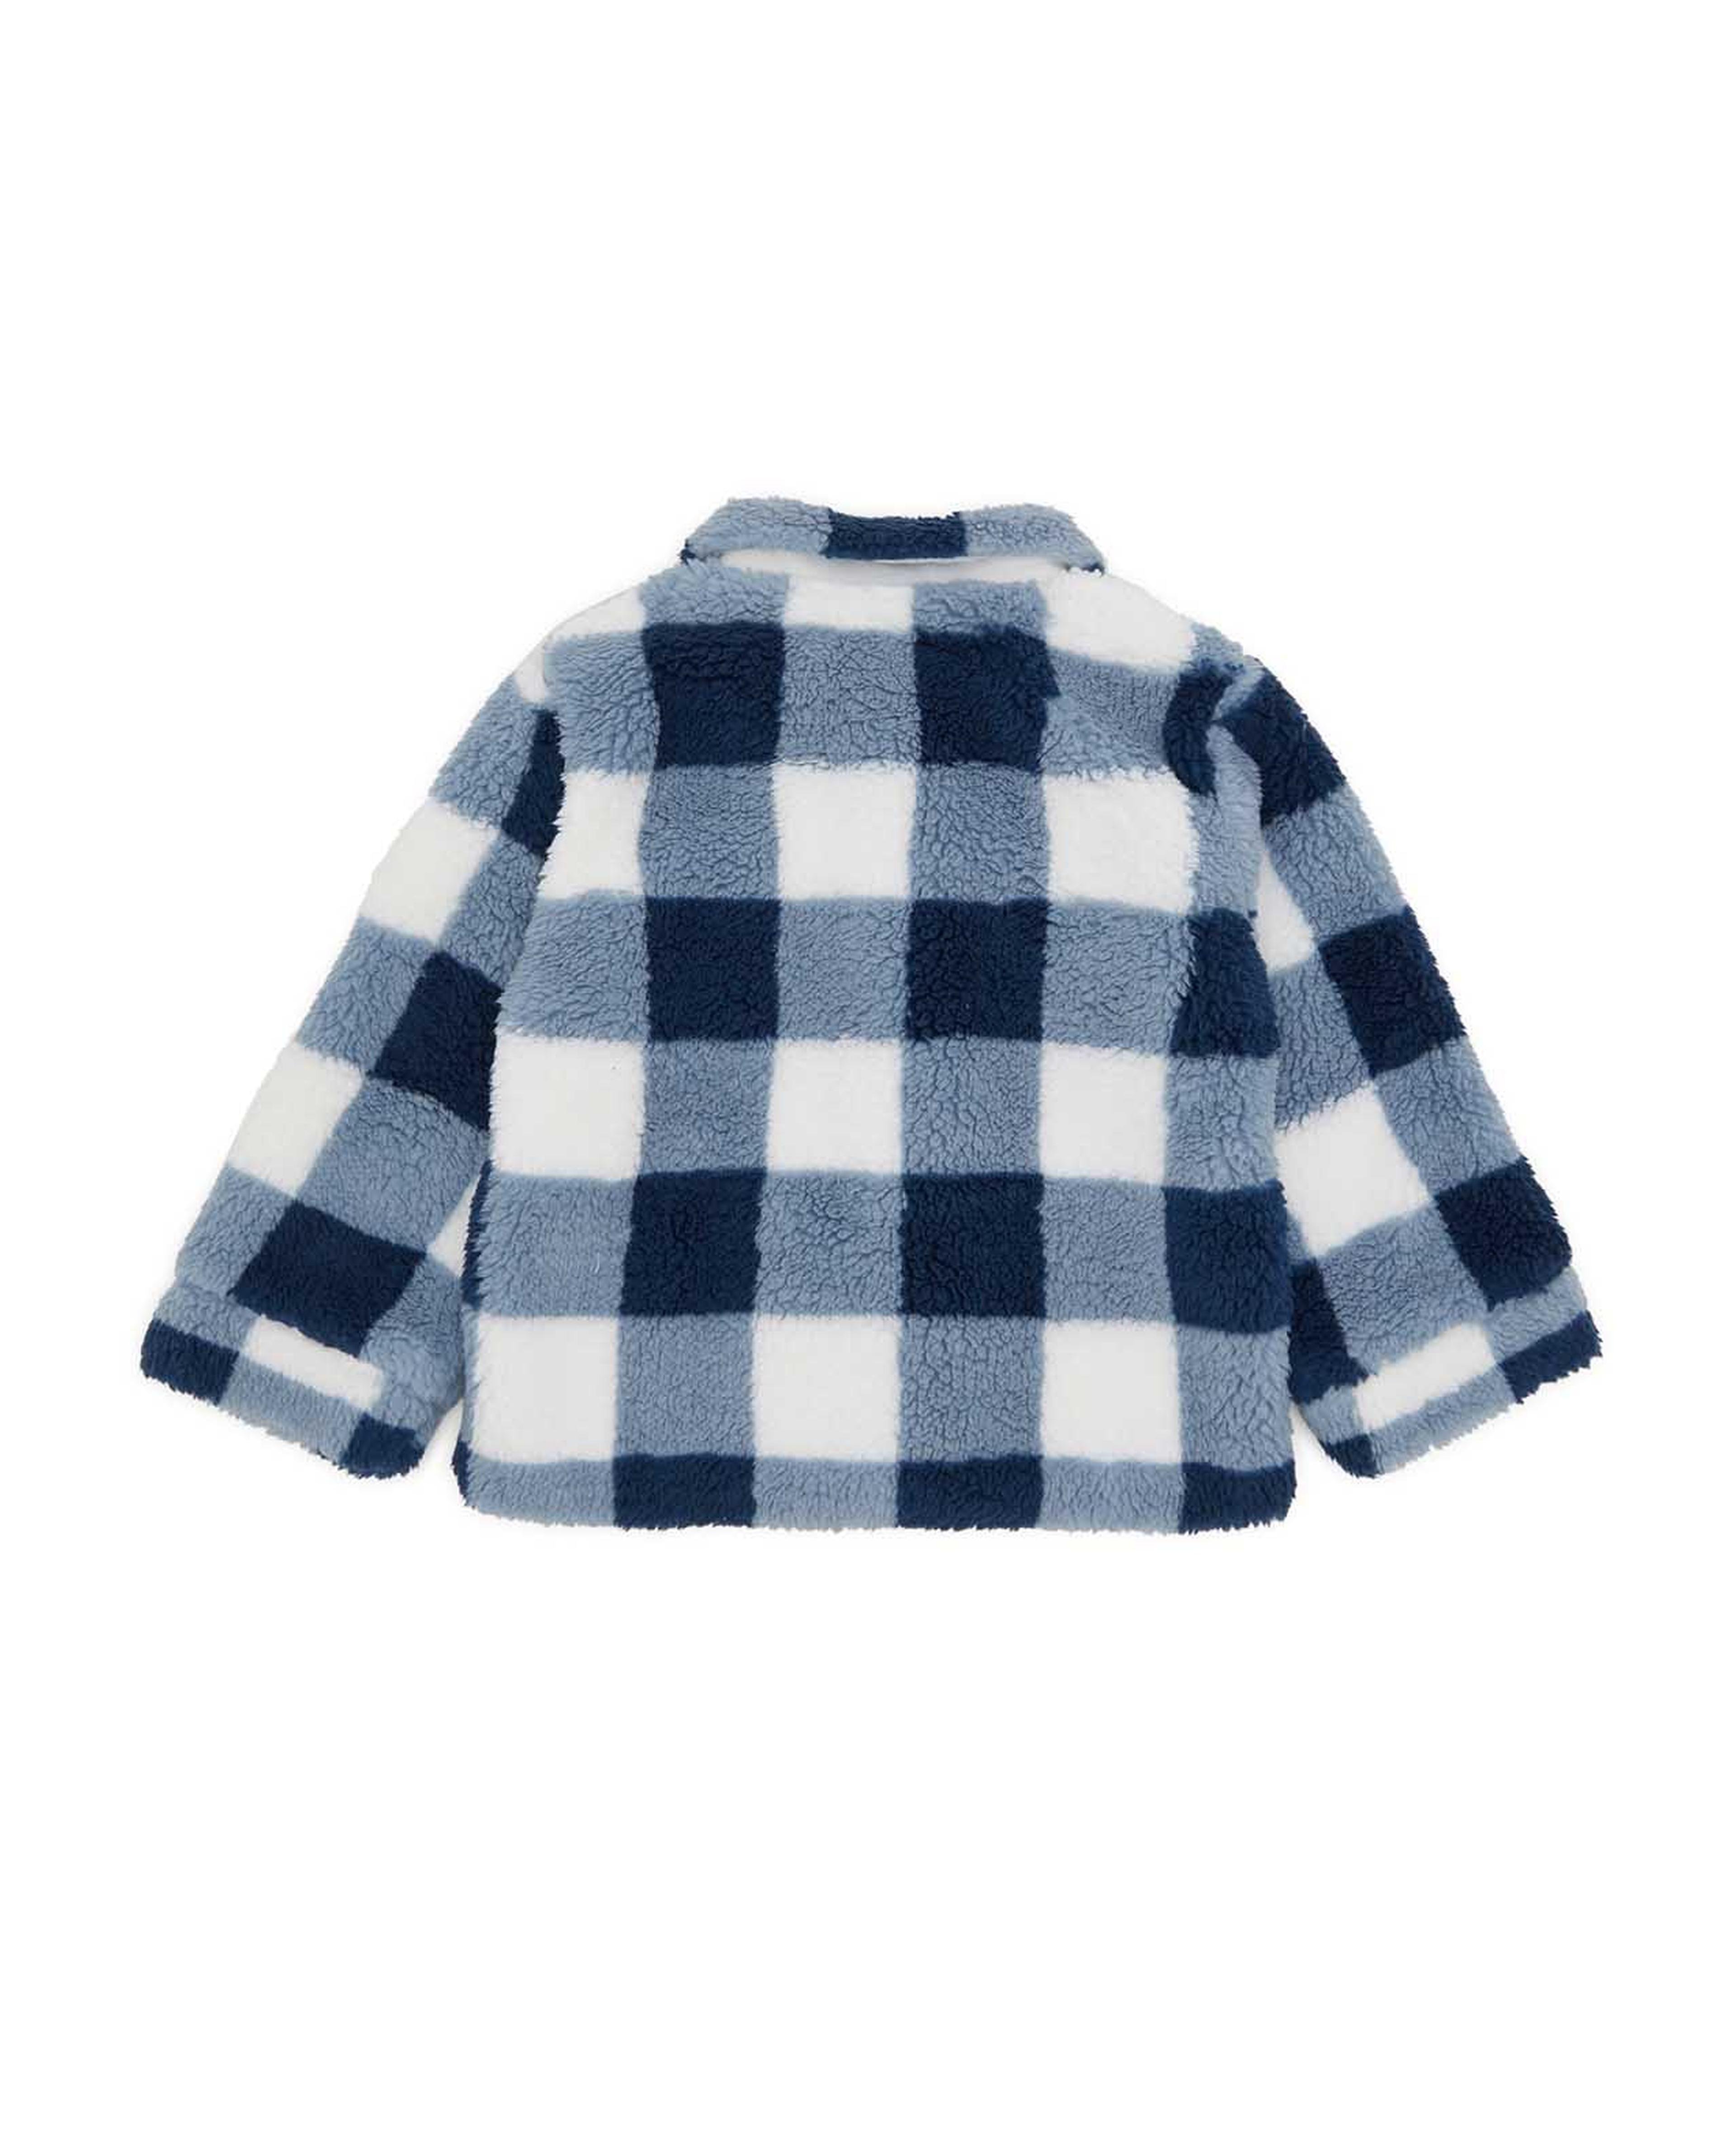 Checked Plush Jacket with Button Closure